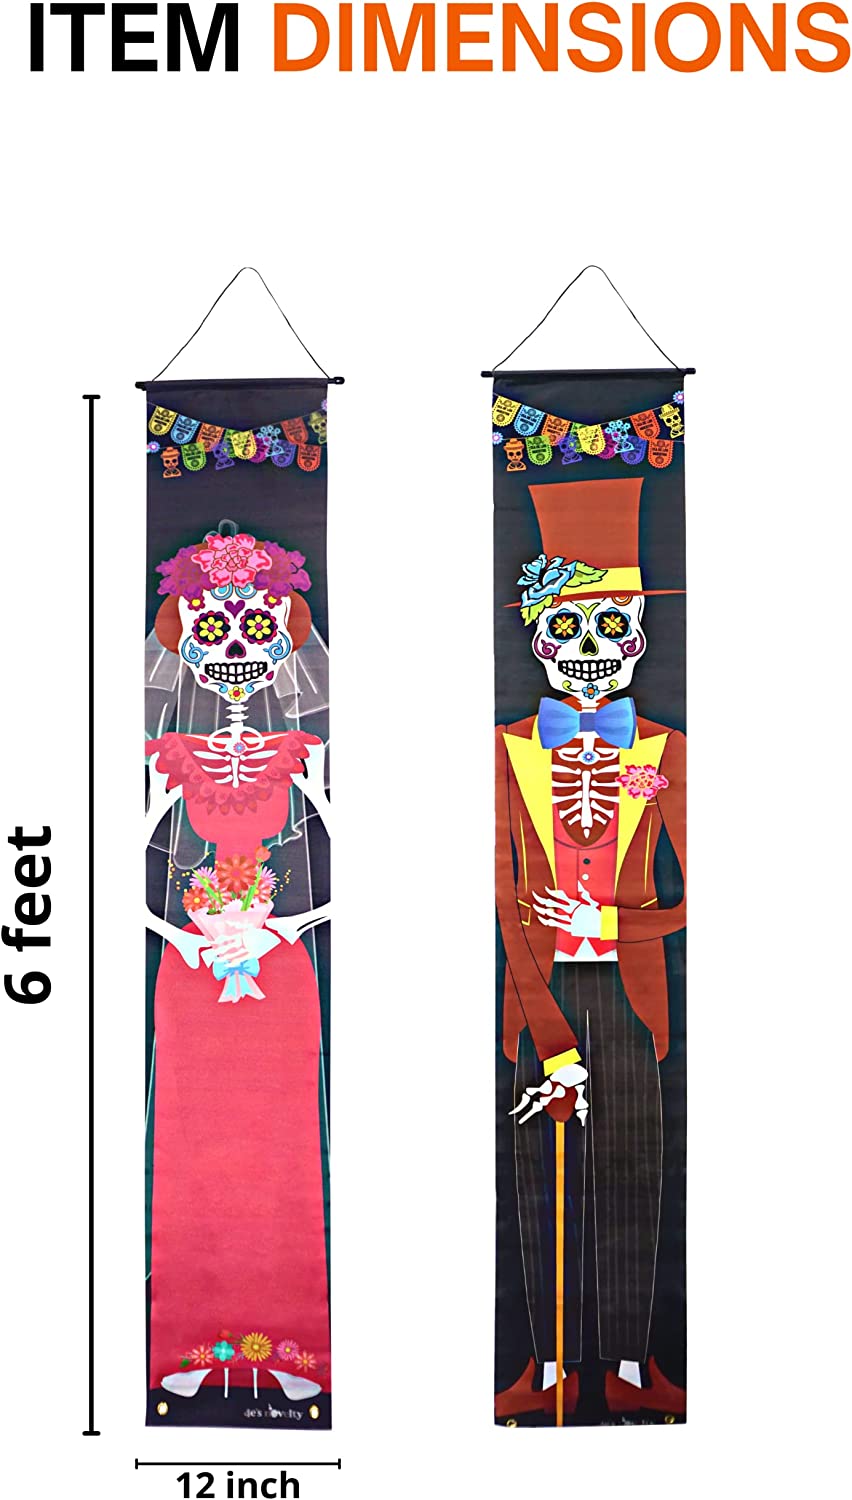 6Ft Dia De Los Muertos Decor, Set of 2 Banners - Day of The Dead Decorations, Hanging Sugar Skull Backdrop Banner for Home Indoor & Outdoor Porch Sign Halloween Decorations by 4E's Novelty